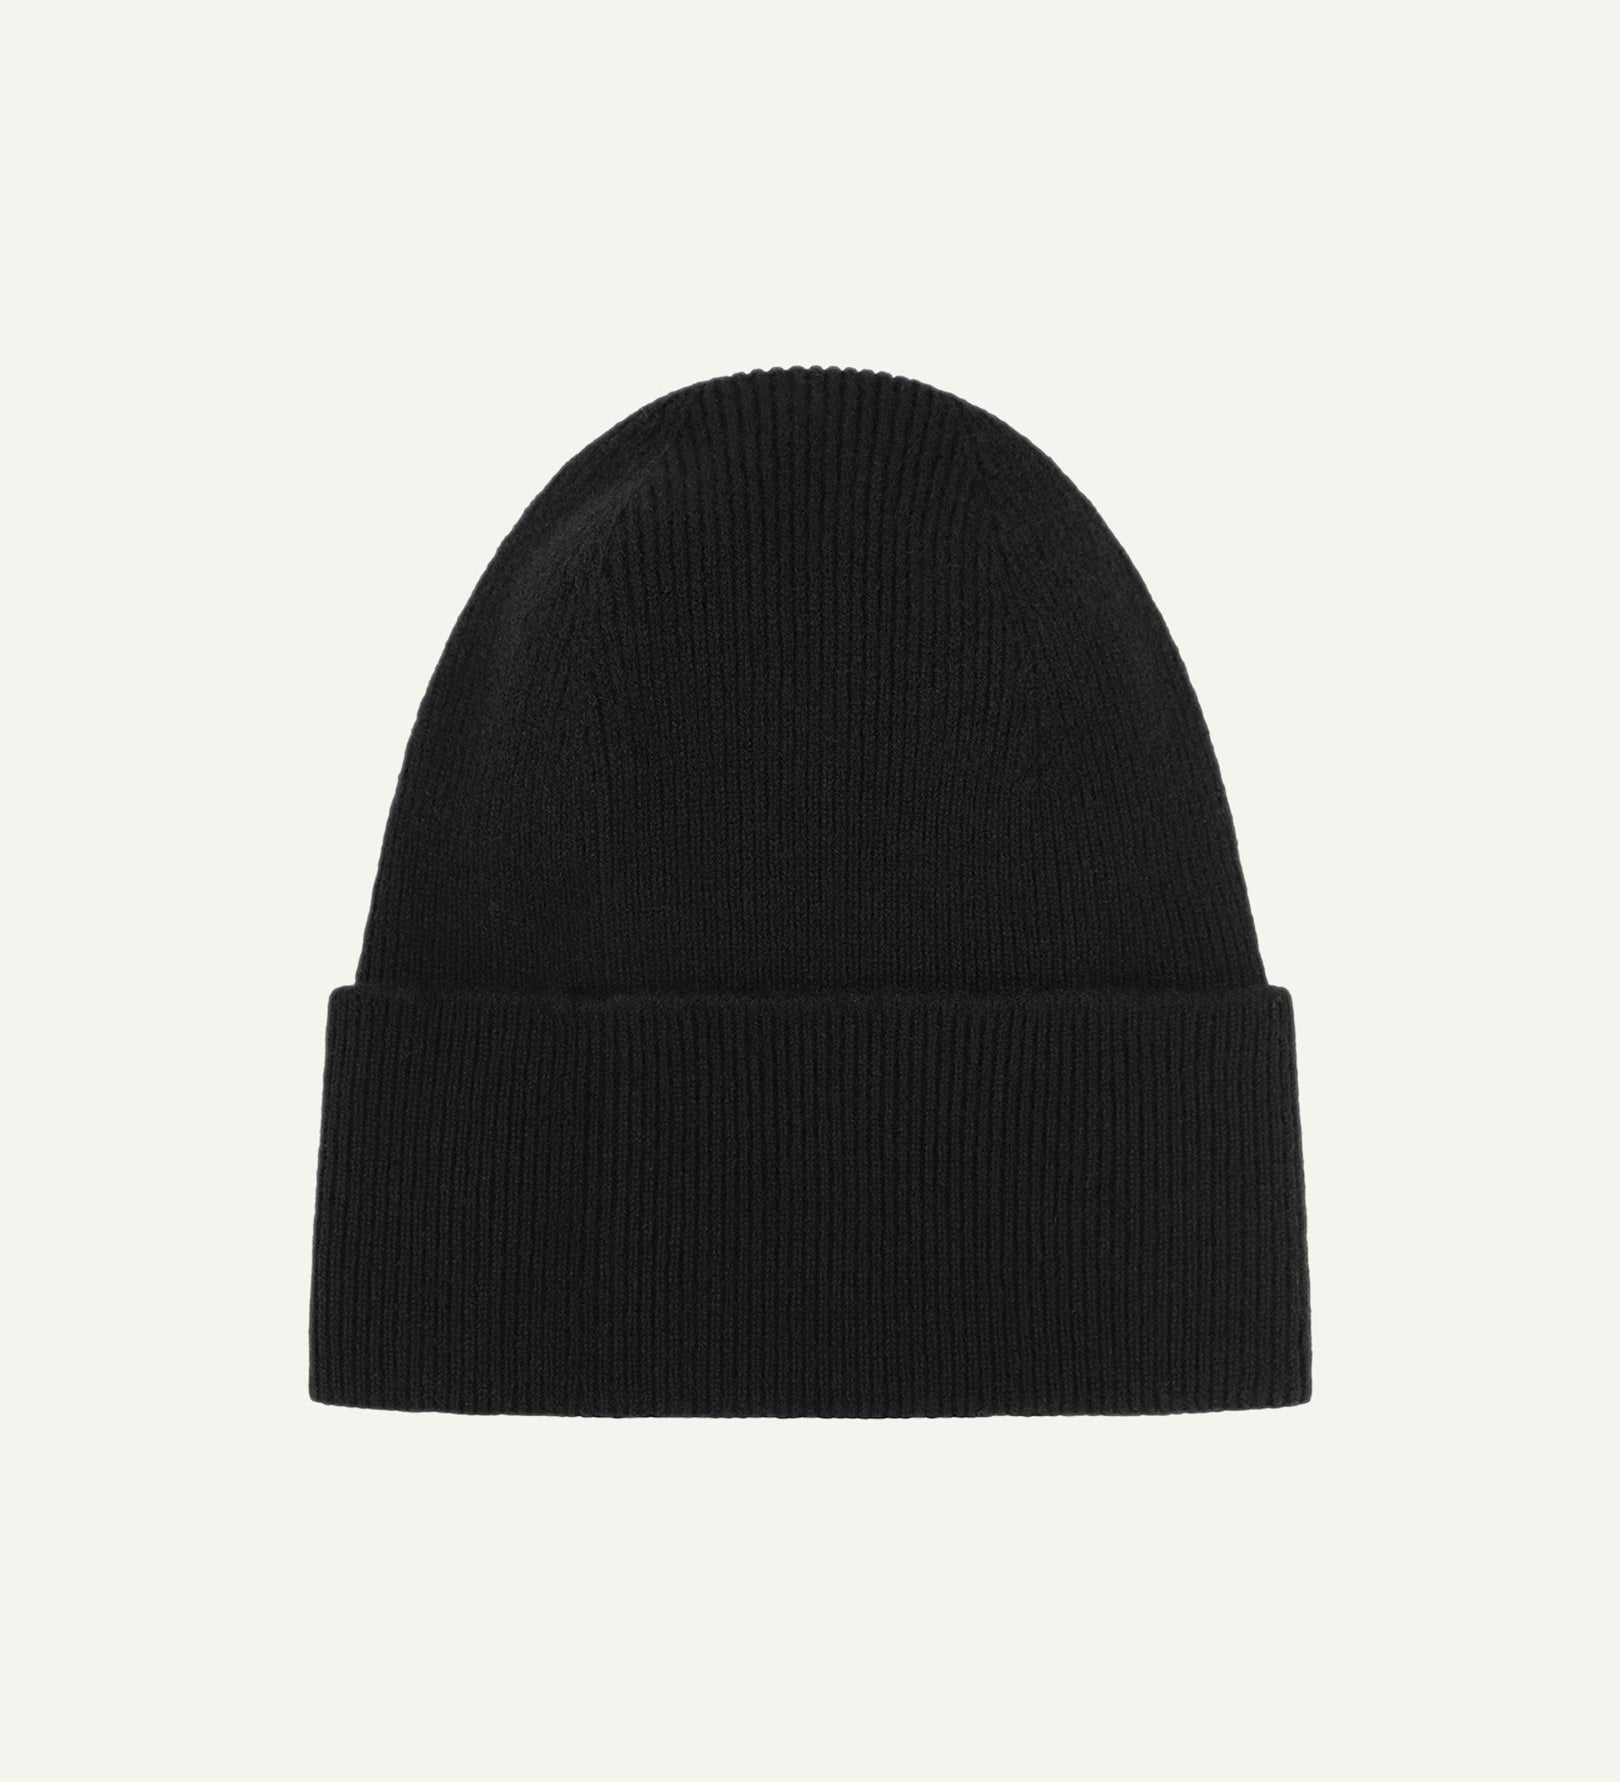 Flat view of Uskees 4004 black wool hat, showing a clear view of the adjustable cuff and the ribbed texture of the hat.